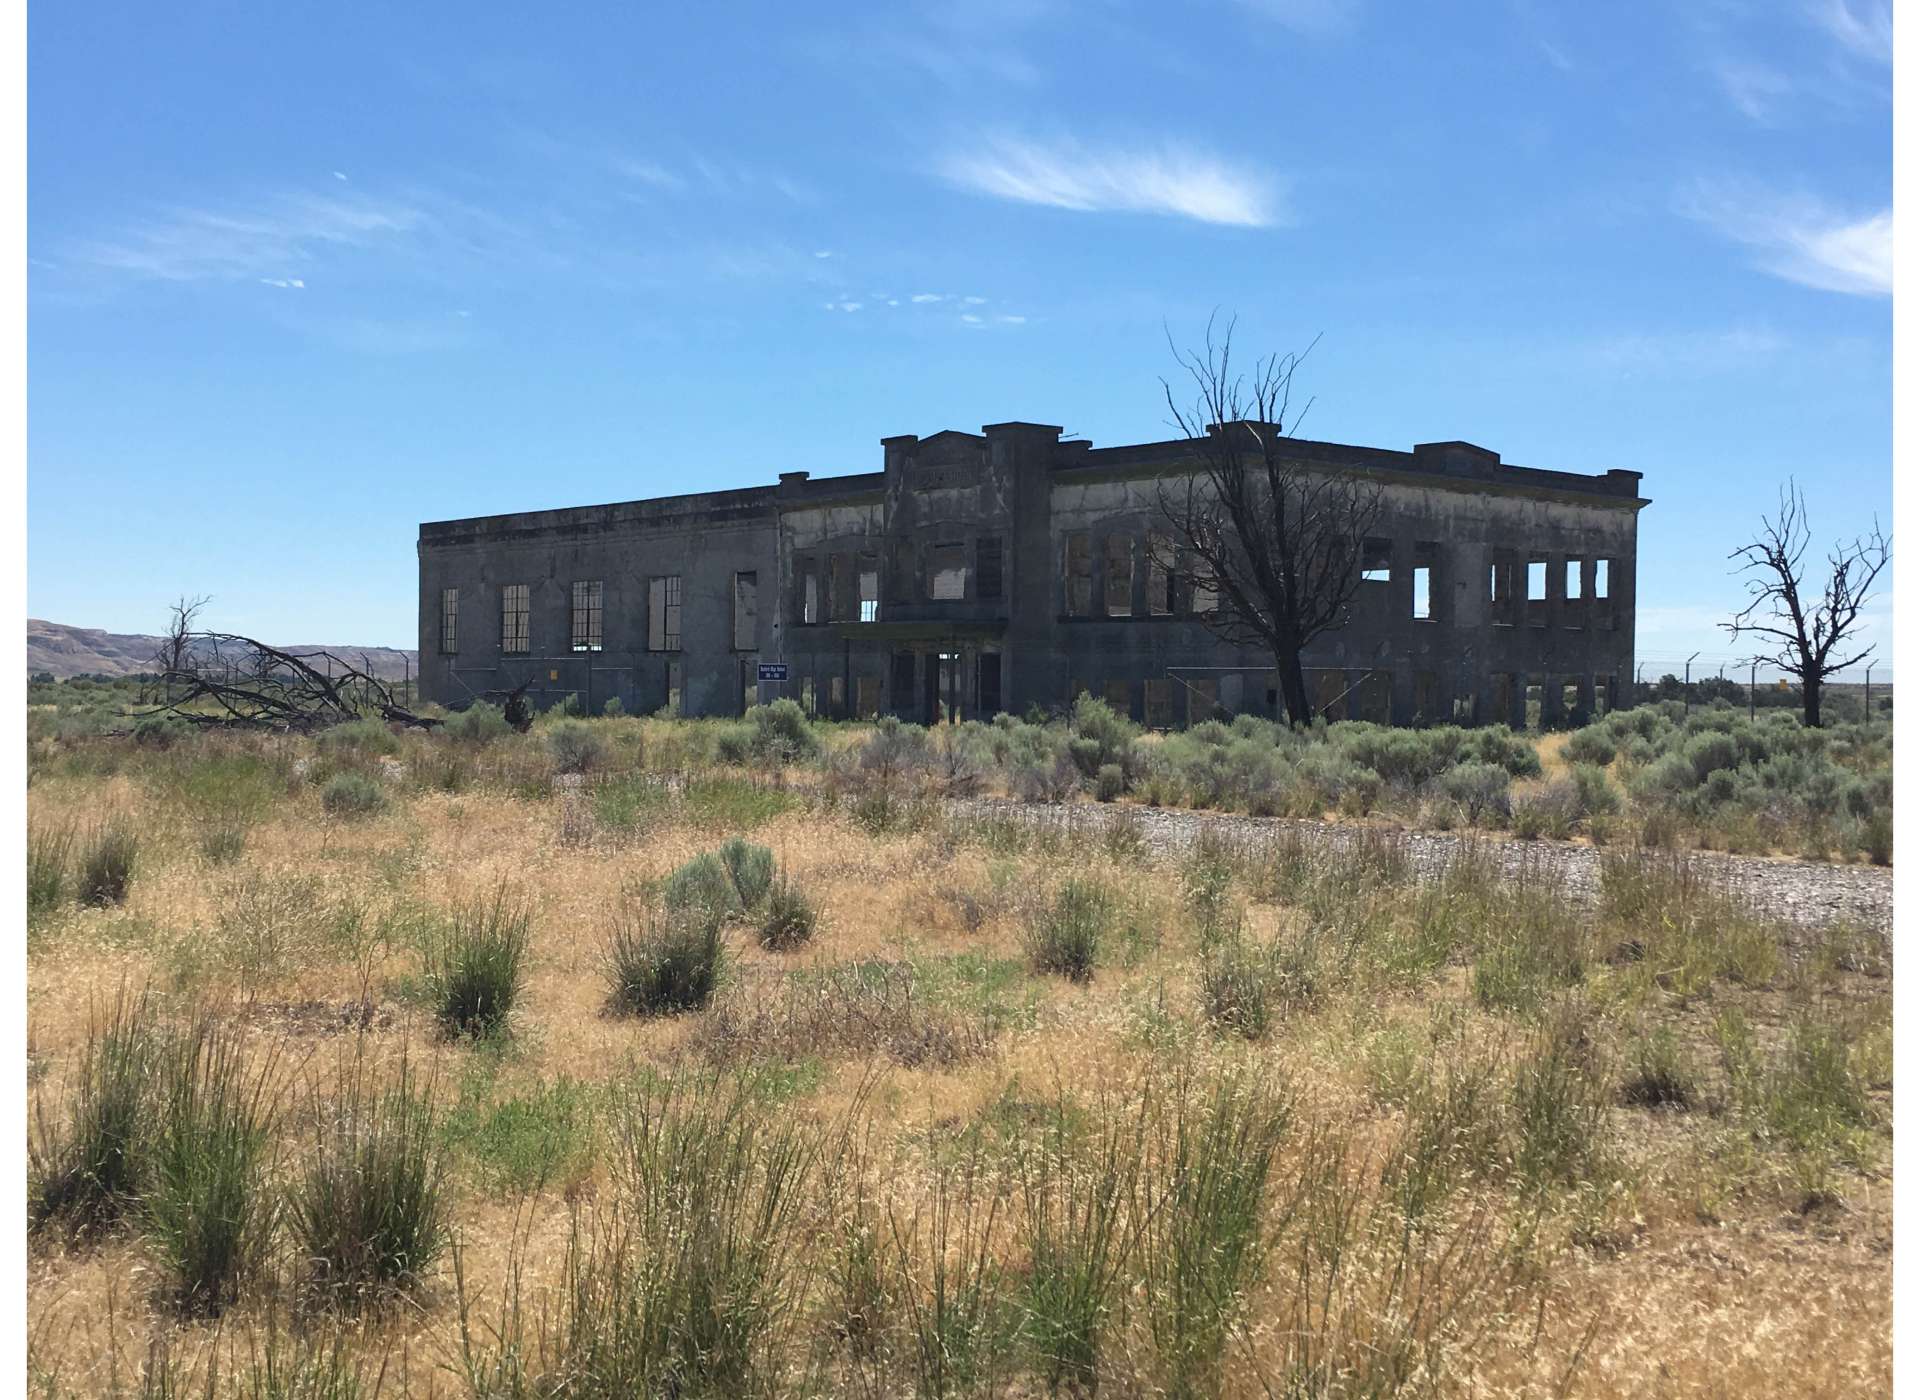 The facade of the old Hanford High School.